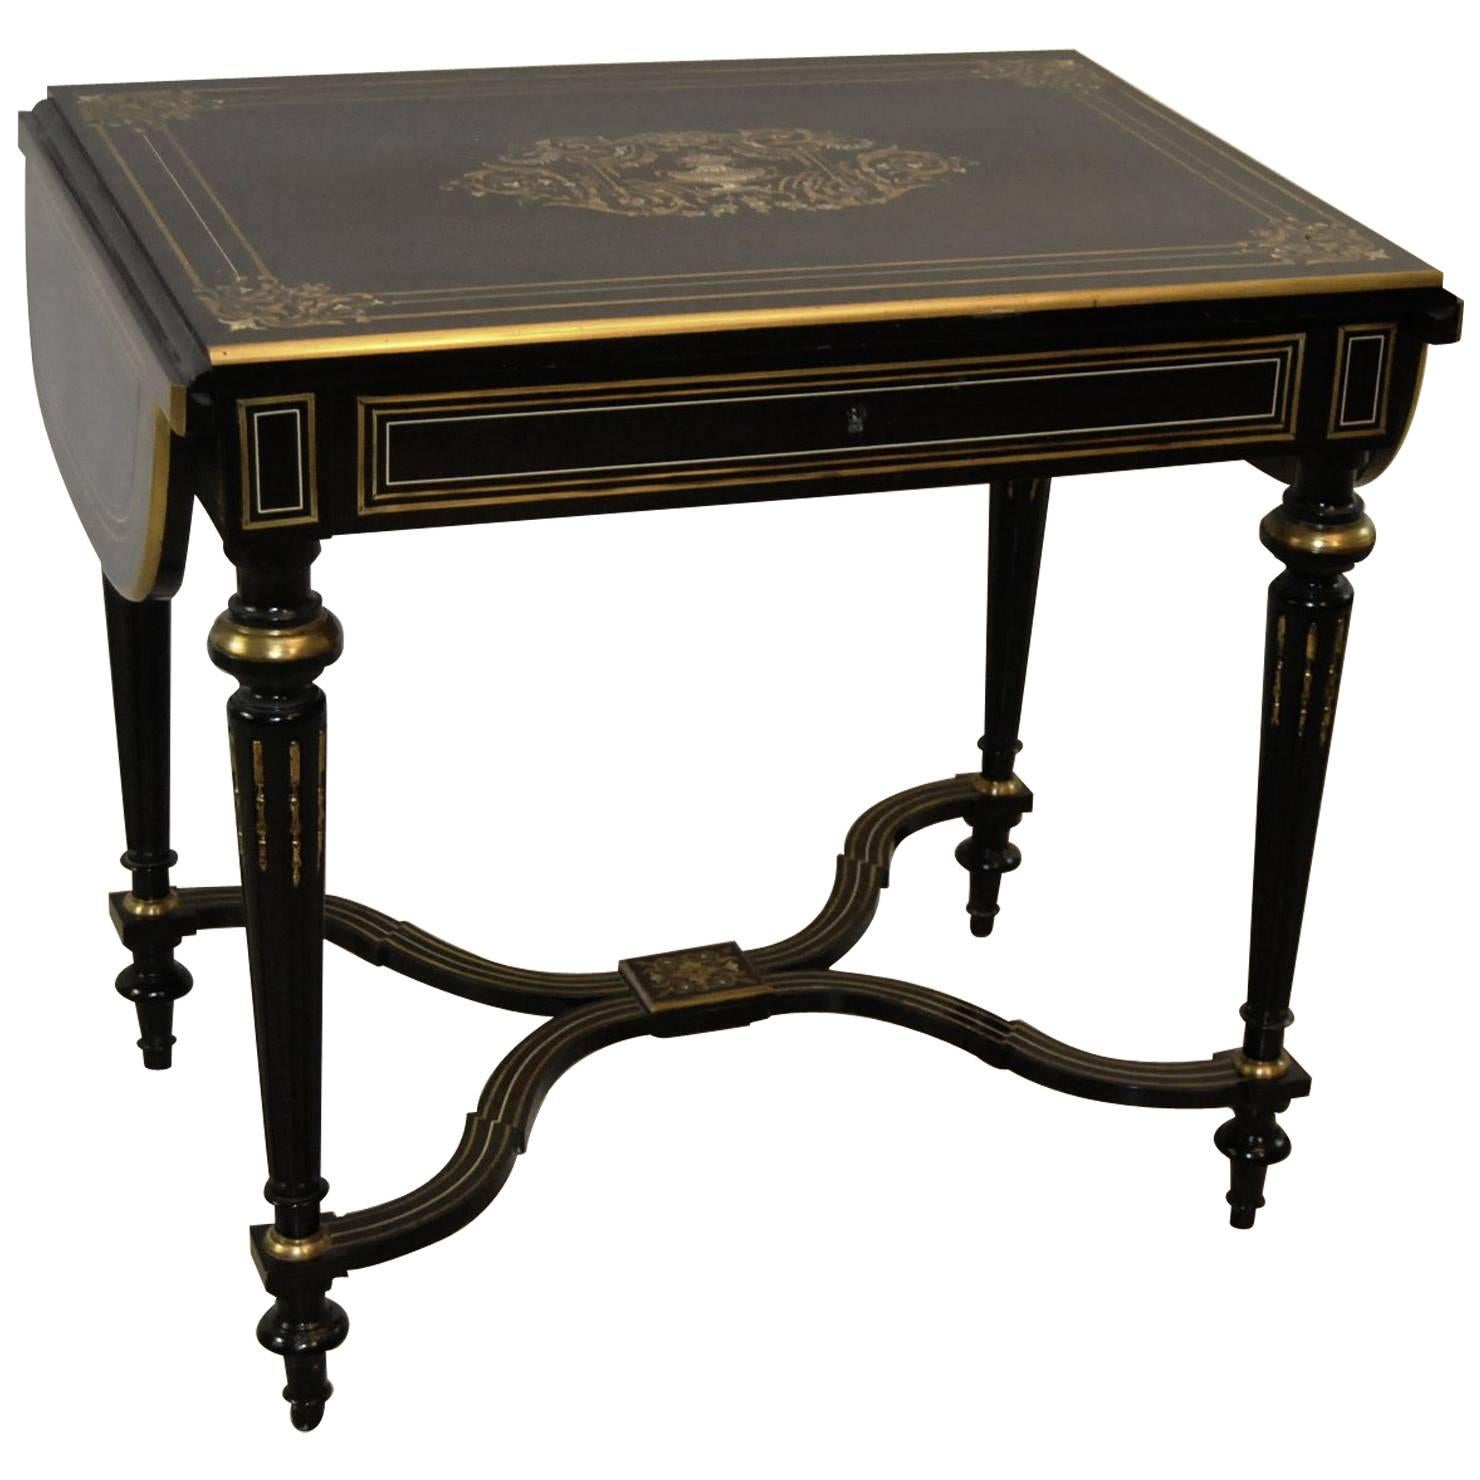 19th Century Ebonized Drop Leaf Table with Inlaid Mother-of-Pearl and Brass For Sale